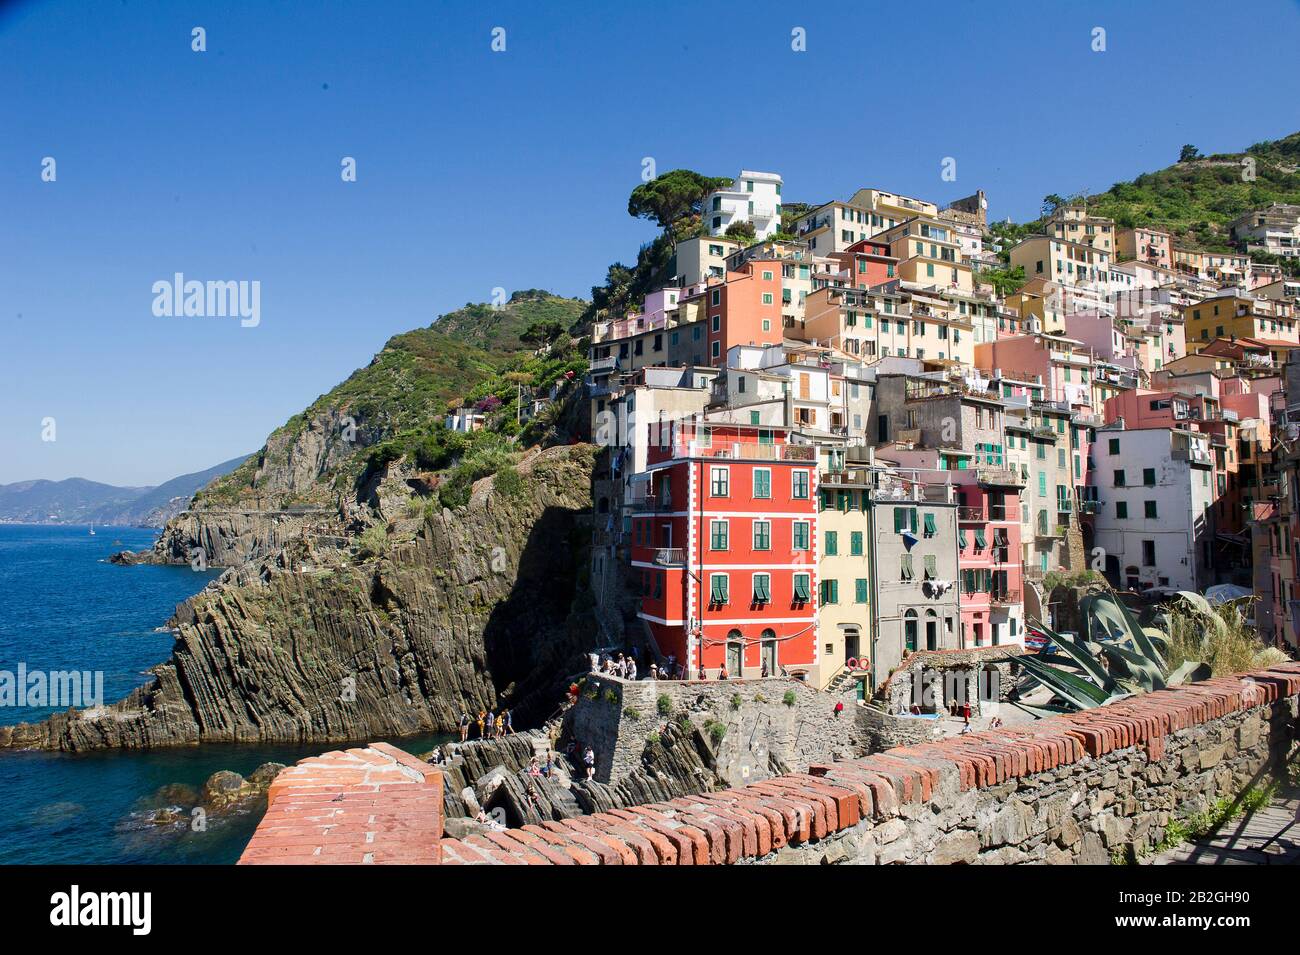 Riomaggiore overlooks the sea in the province of La Spezia, is in the natural park of the Cinque Terre in Liguria, in north-western Italy. It is on the UNESCO World Heritage list Stock Photo